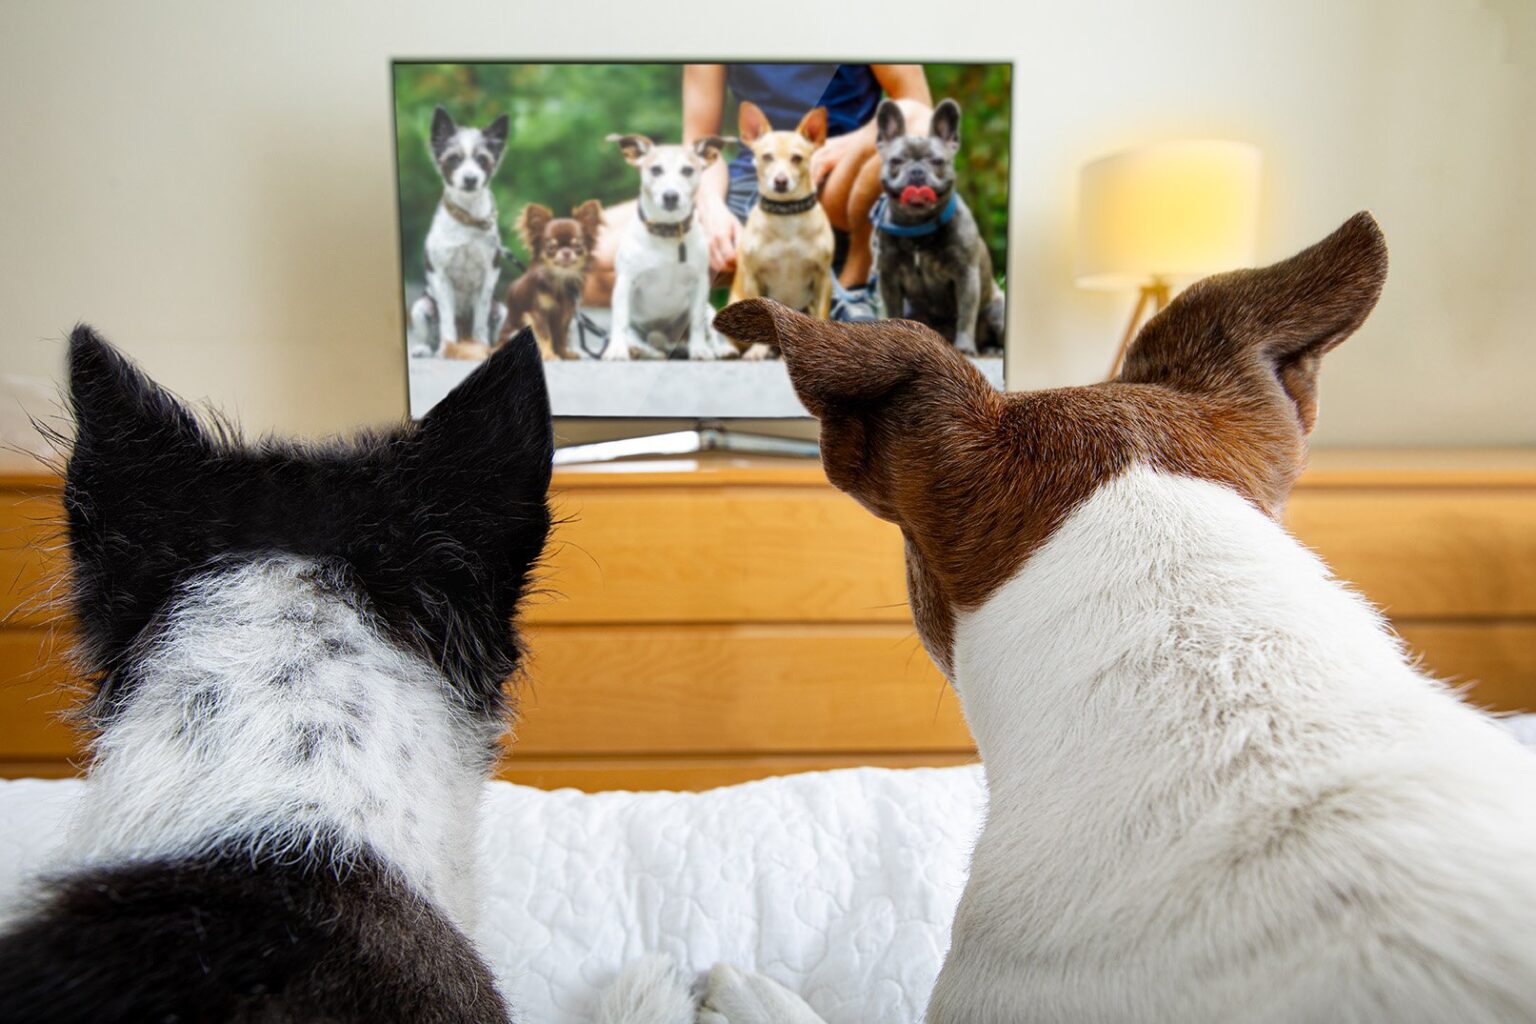 Some dogs love to watch television. Find out why these special canines spend so much time watching TV.